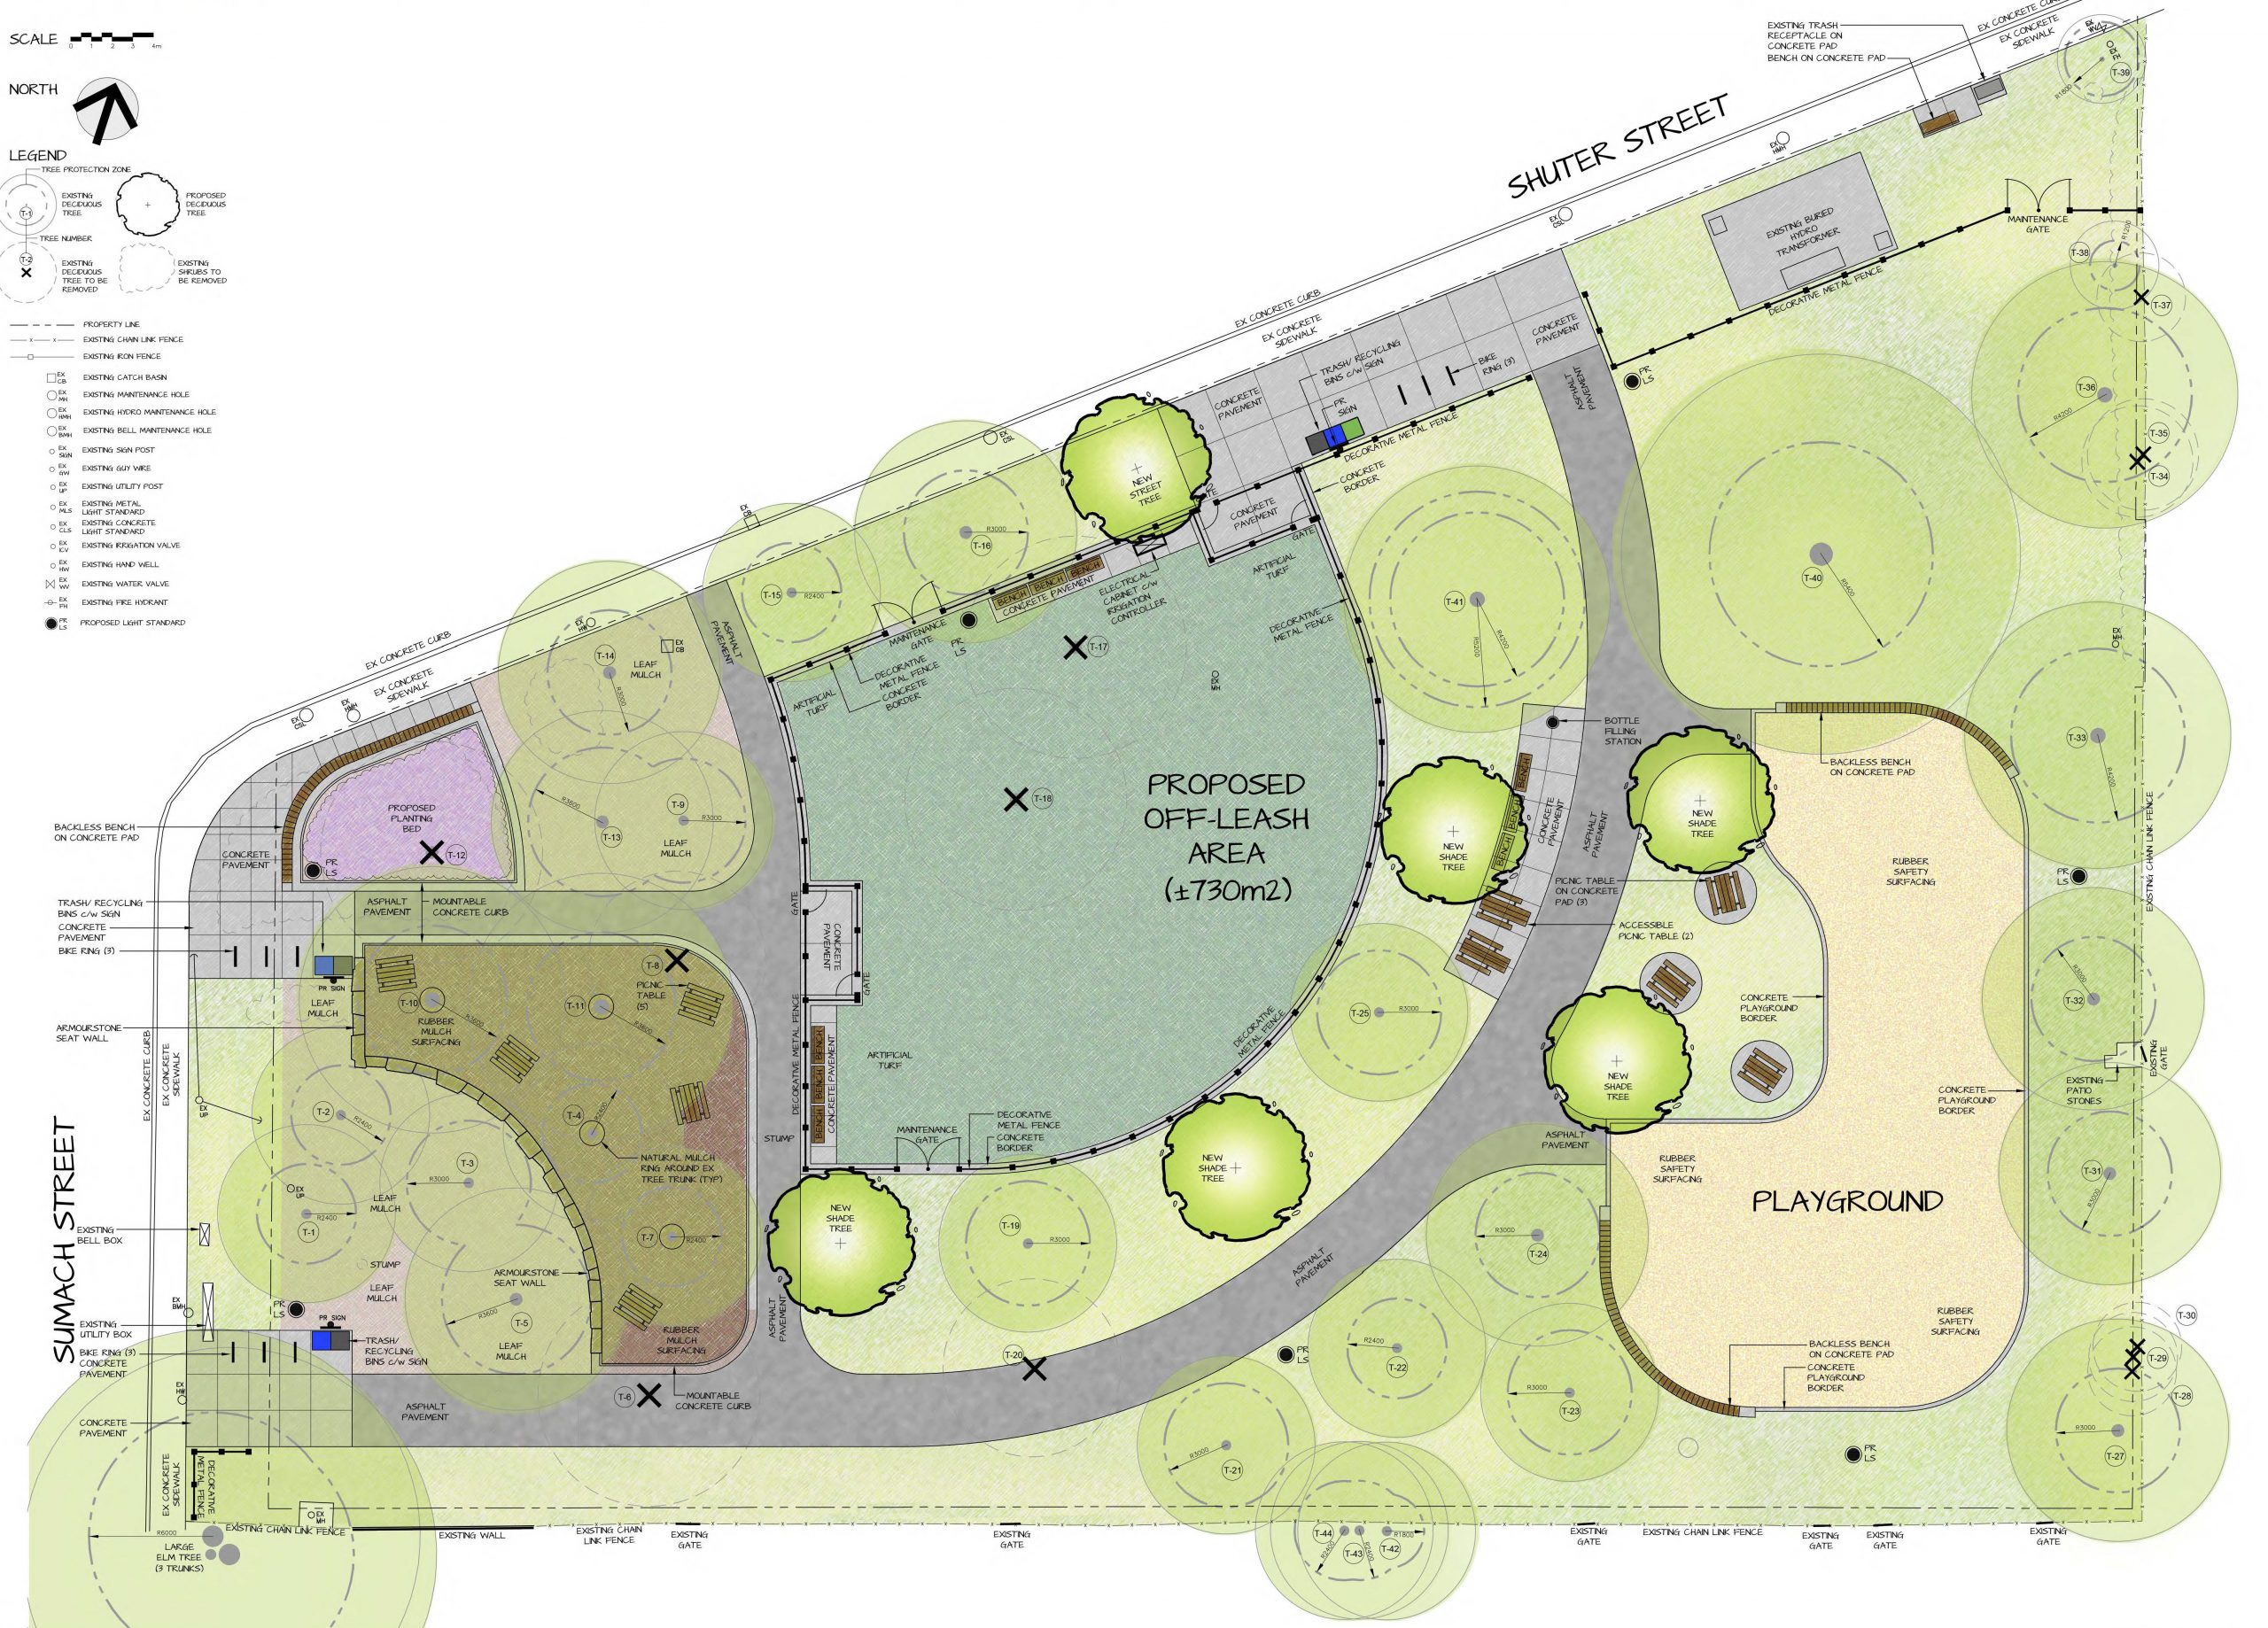 The new park design integrates the dogs off-leash area into the central area of the park, situated closer to the street and totally enclosed with 1.5 m height fencing. The playground is located in the eastern area of the park, which includes a picnic area for family enjoyment. The western end of the park provides additional seating and picnic area to encourage more visitation from patrons of nearby cafes and eating establishments, and to support local children's day programs. In general, views into and within the park have been enhanced, and more entrances into the park have been provided. Park lighting will be greatly improved.